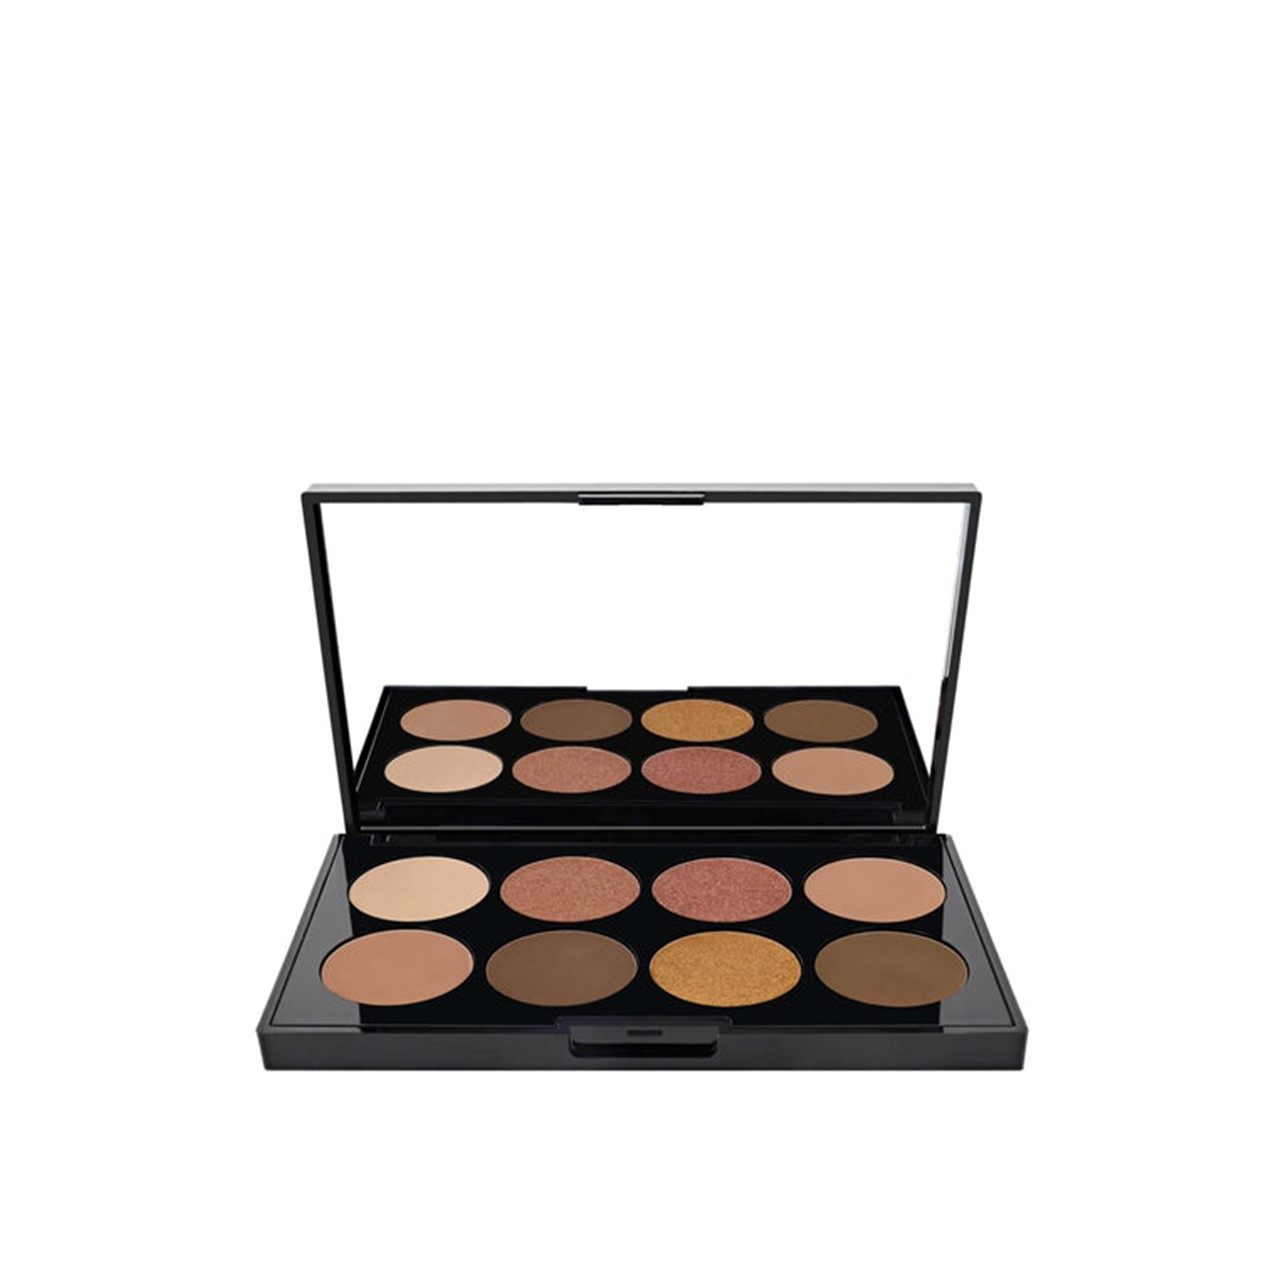 W7 Makeup Royal Attraction Eyeshadow Palette